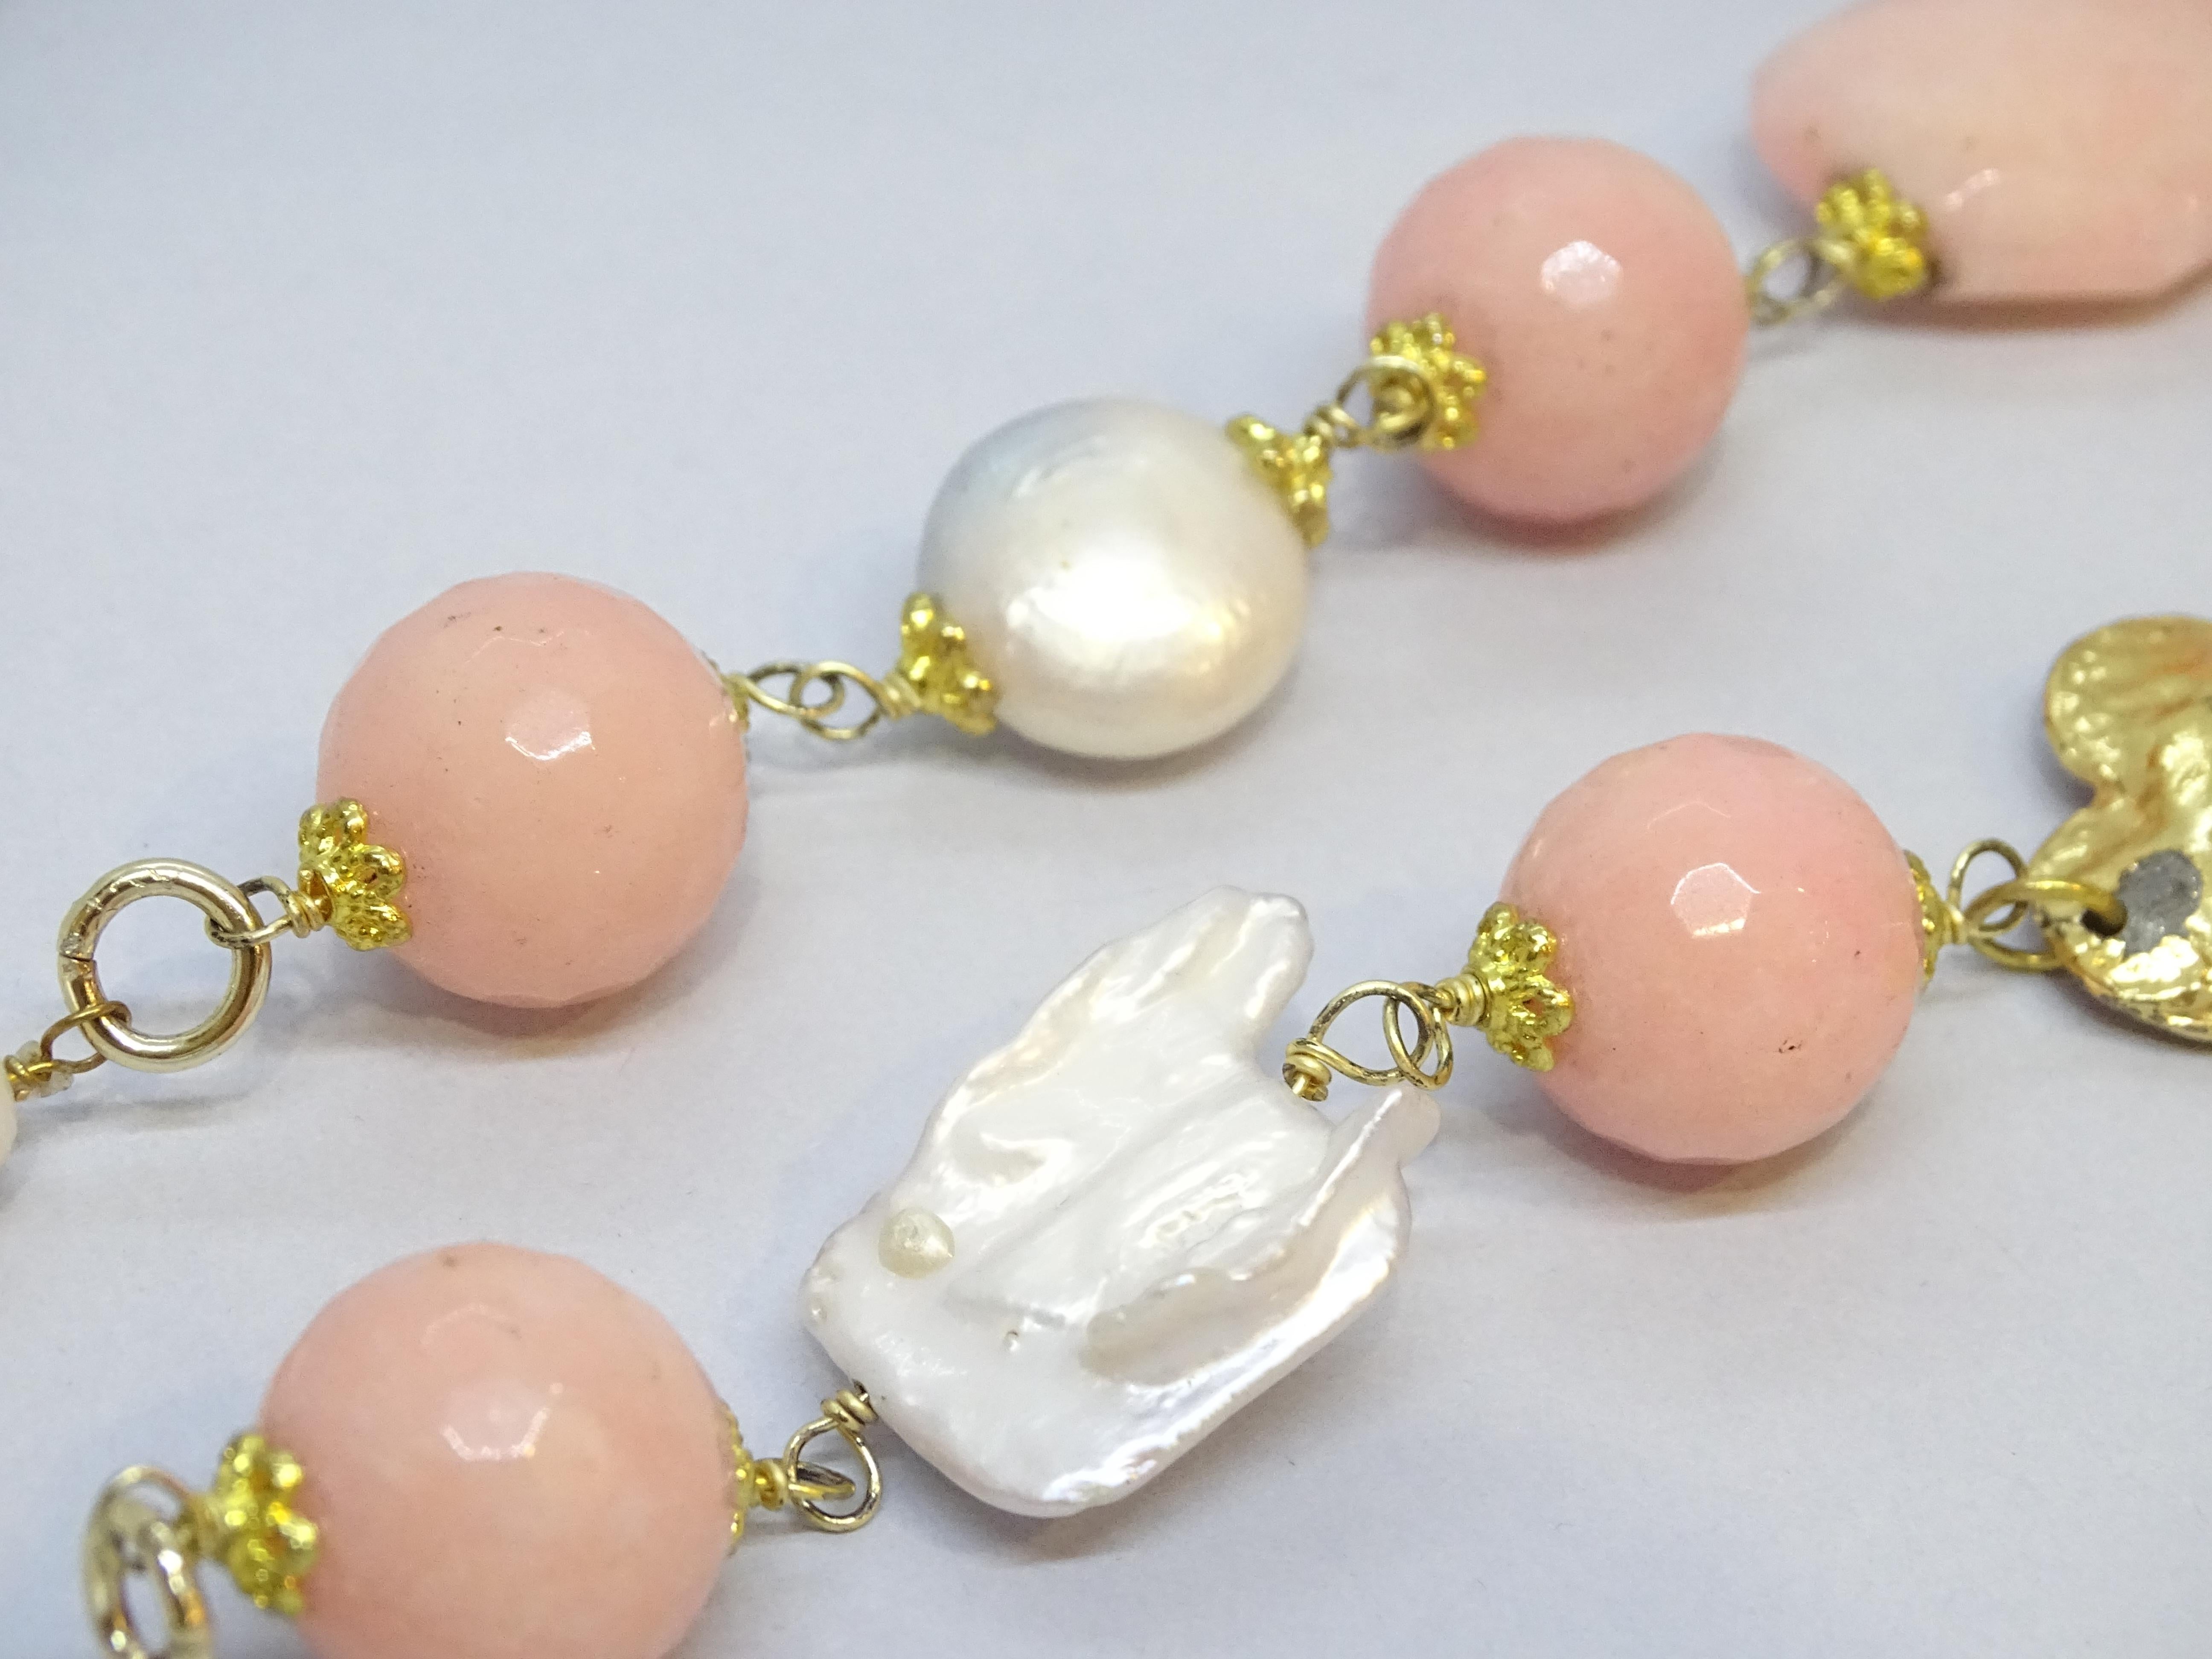 Italian necklace with baroque pearls, rose quartz and enamel For Sale 5